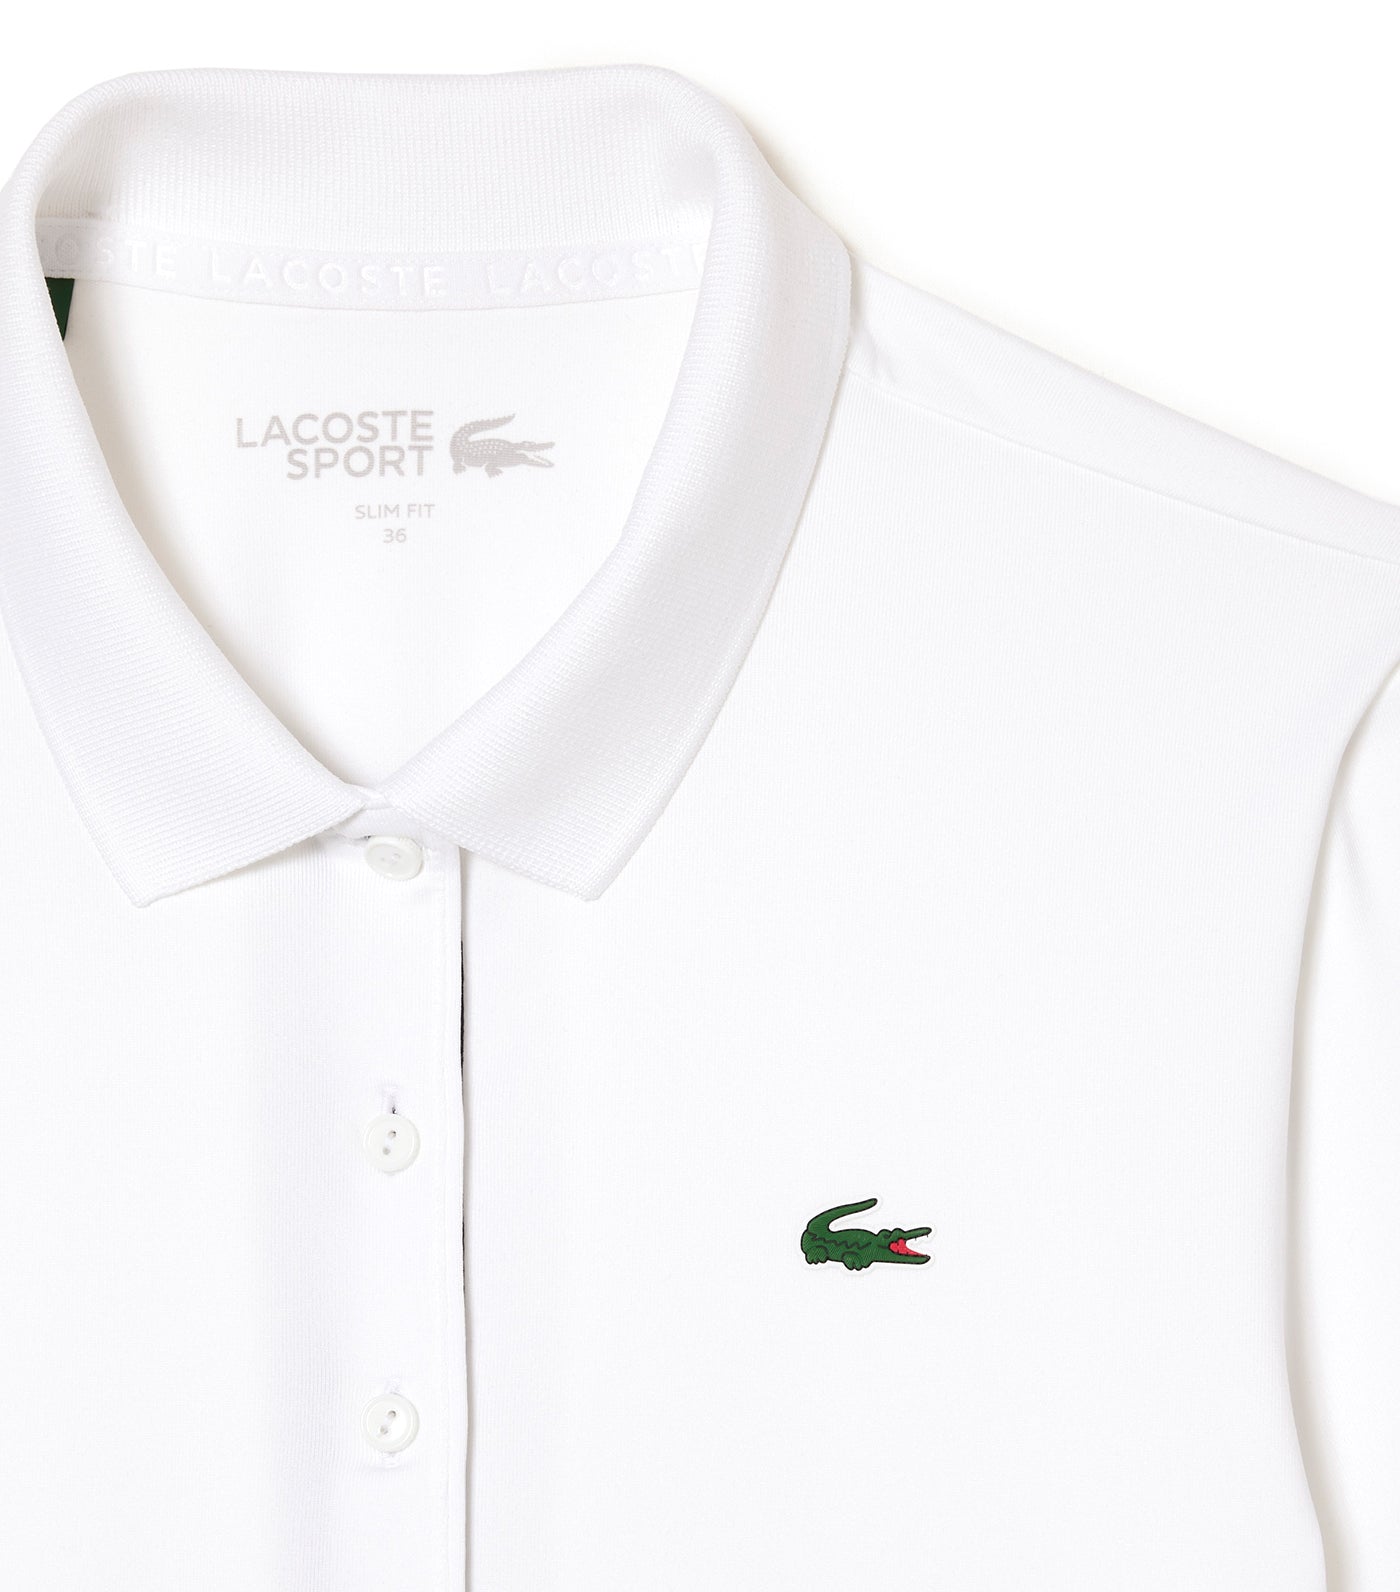 Women's Lacoste SPORT Breathable Stretch Golf Polo Shirt White/Navy Blue